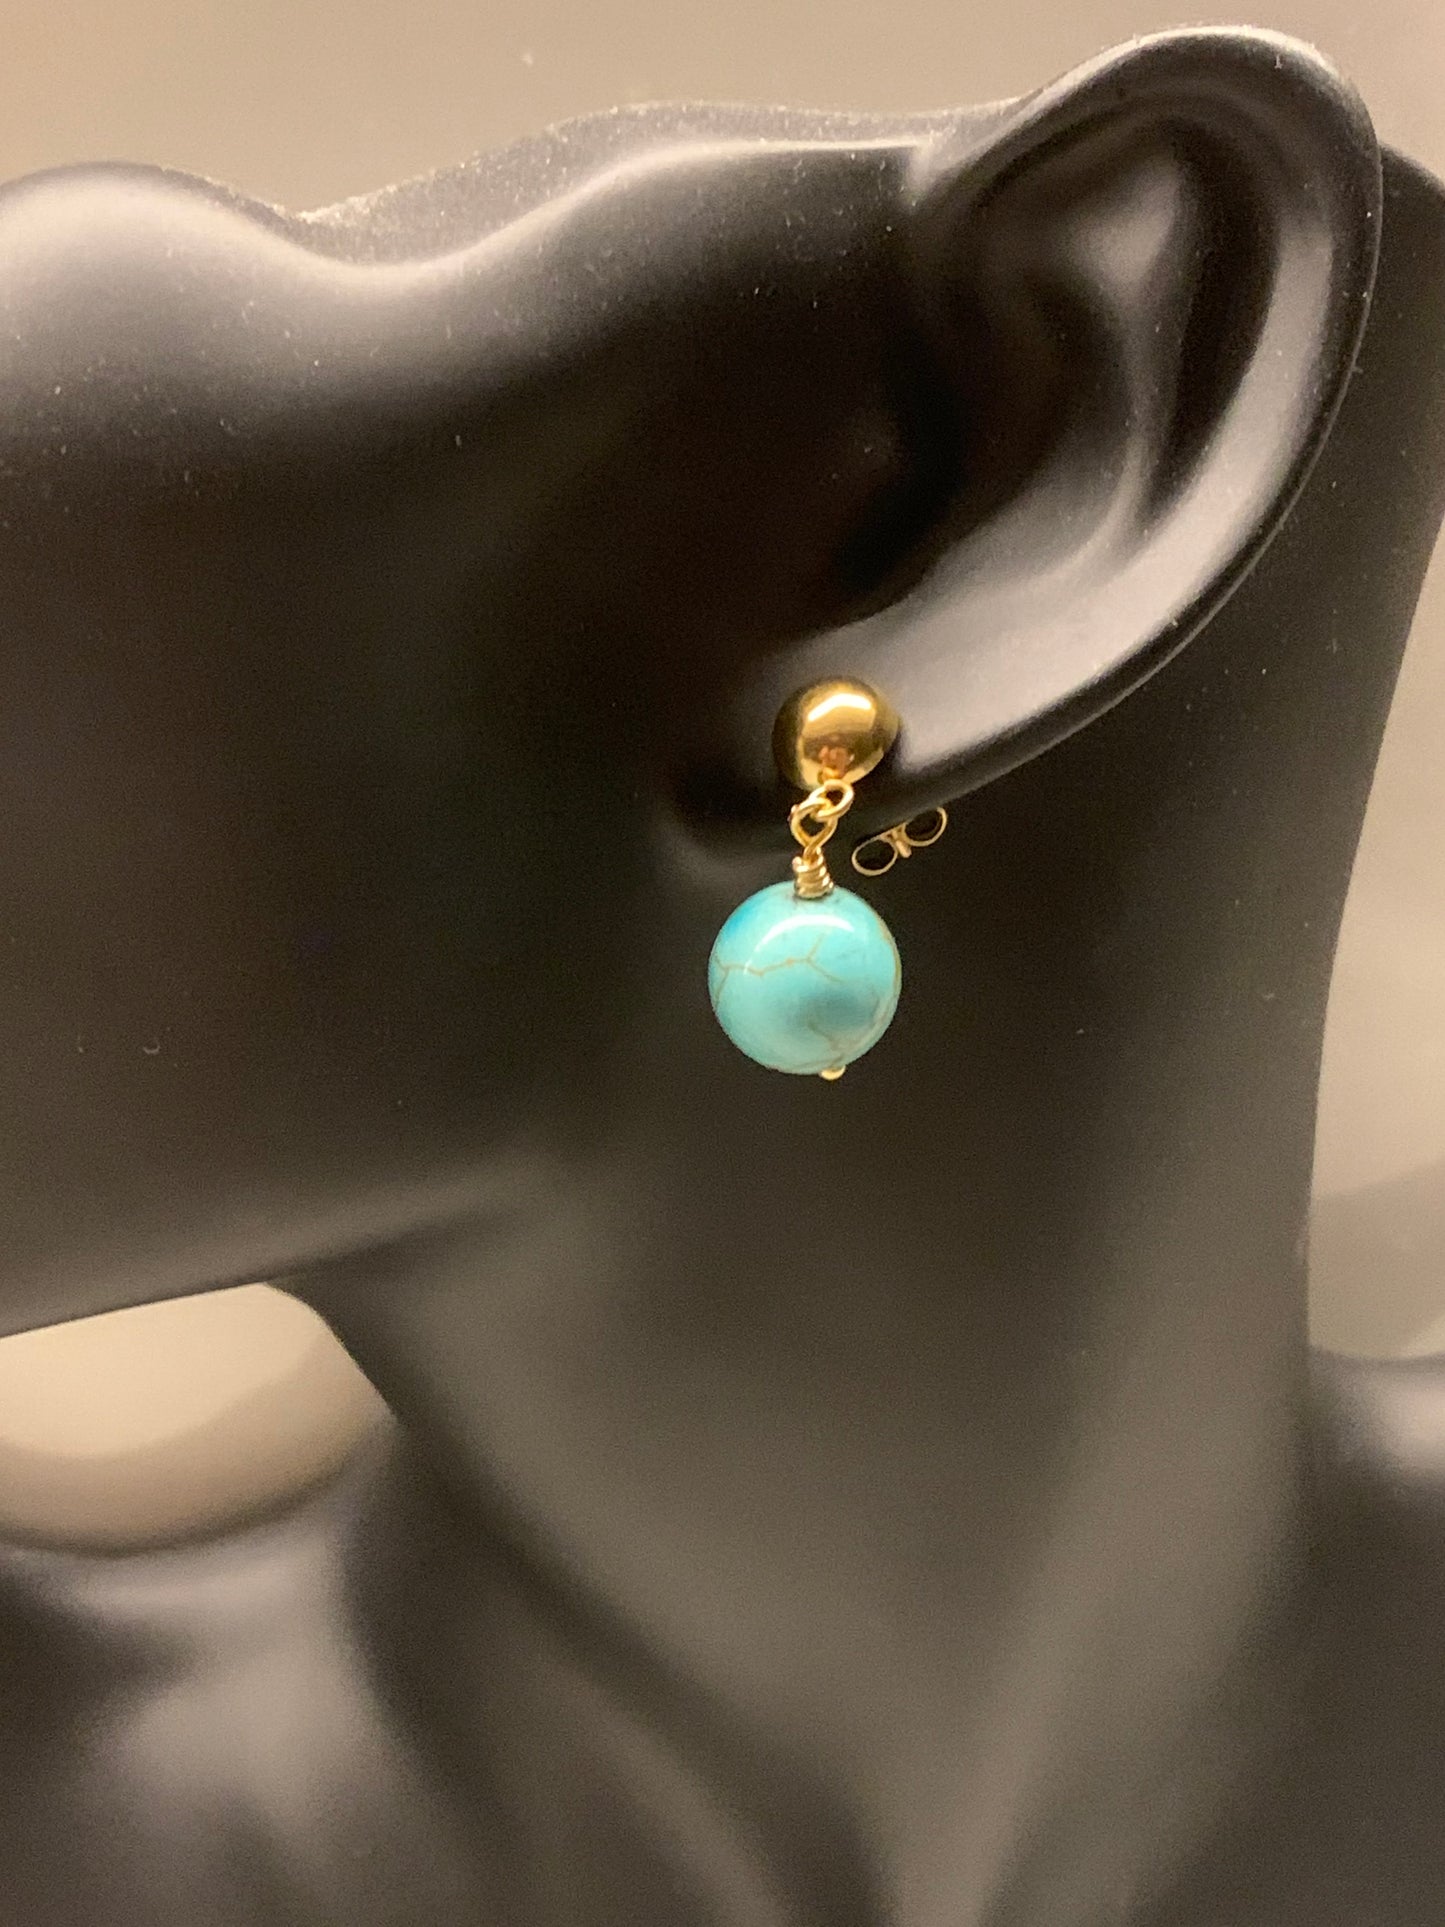 Turquoise Earrings with Shiny/Matte Gold Stud